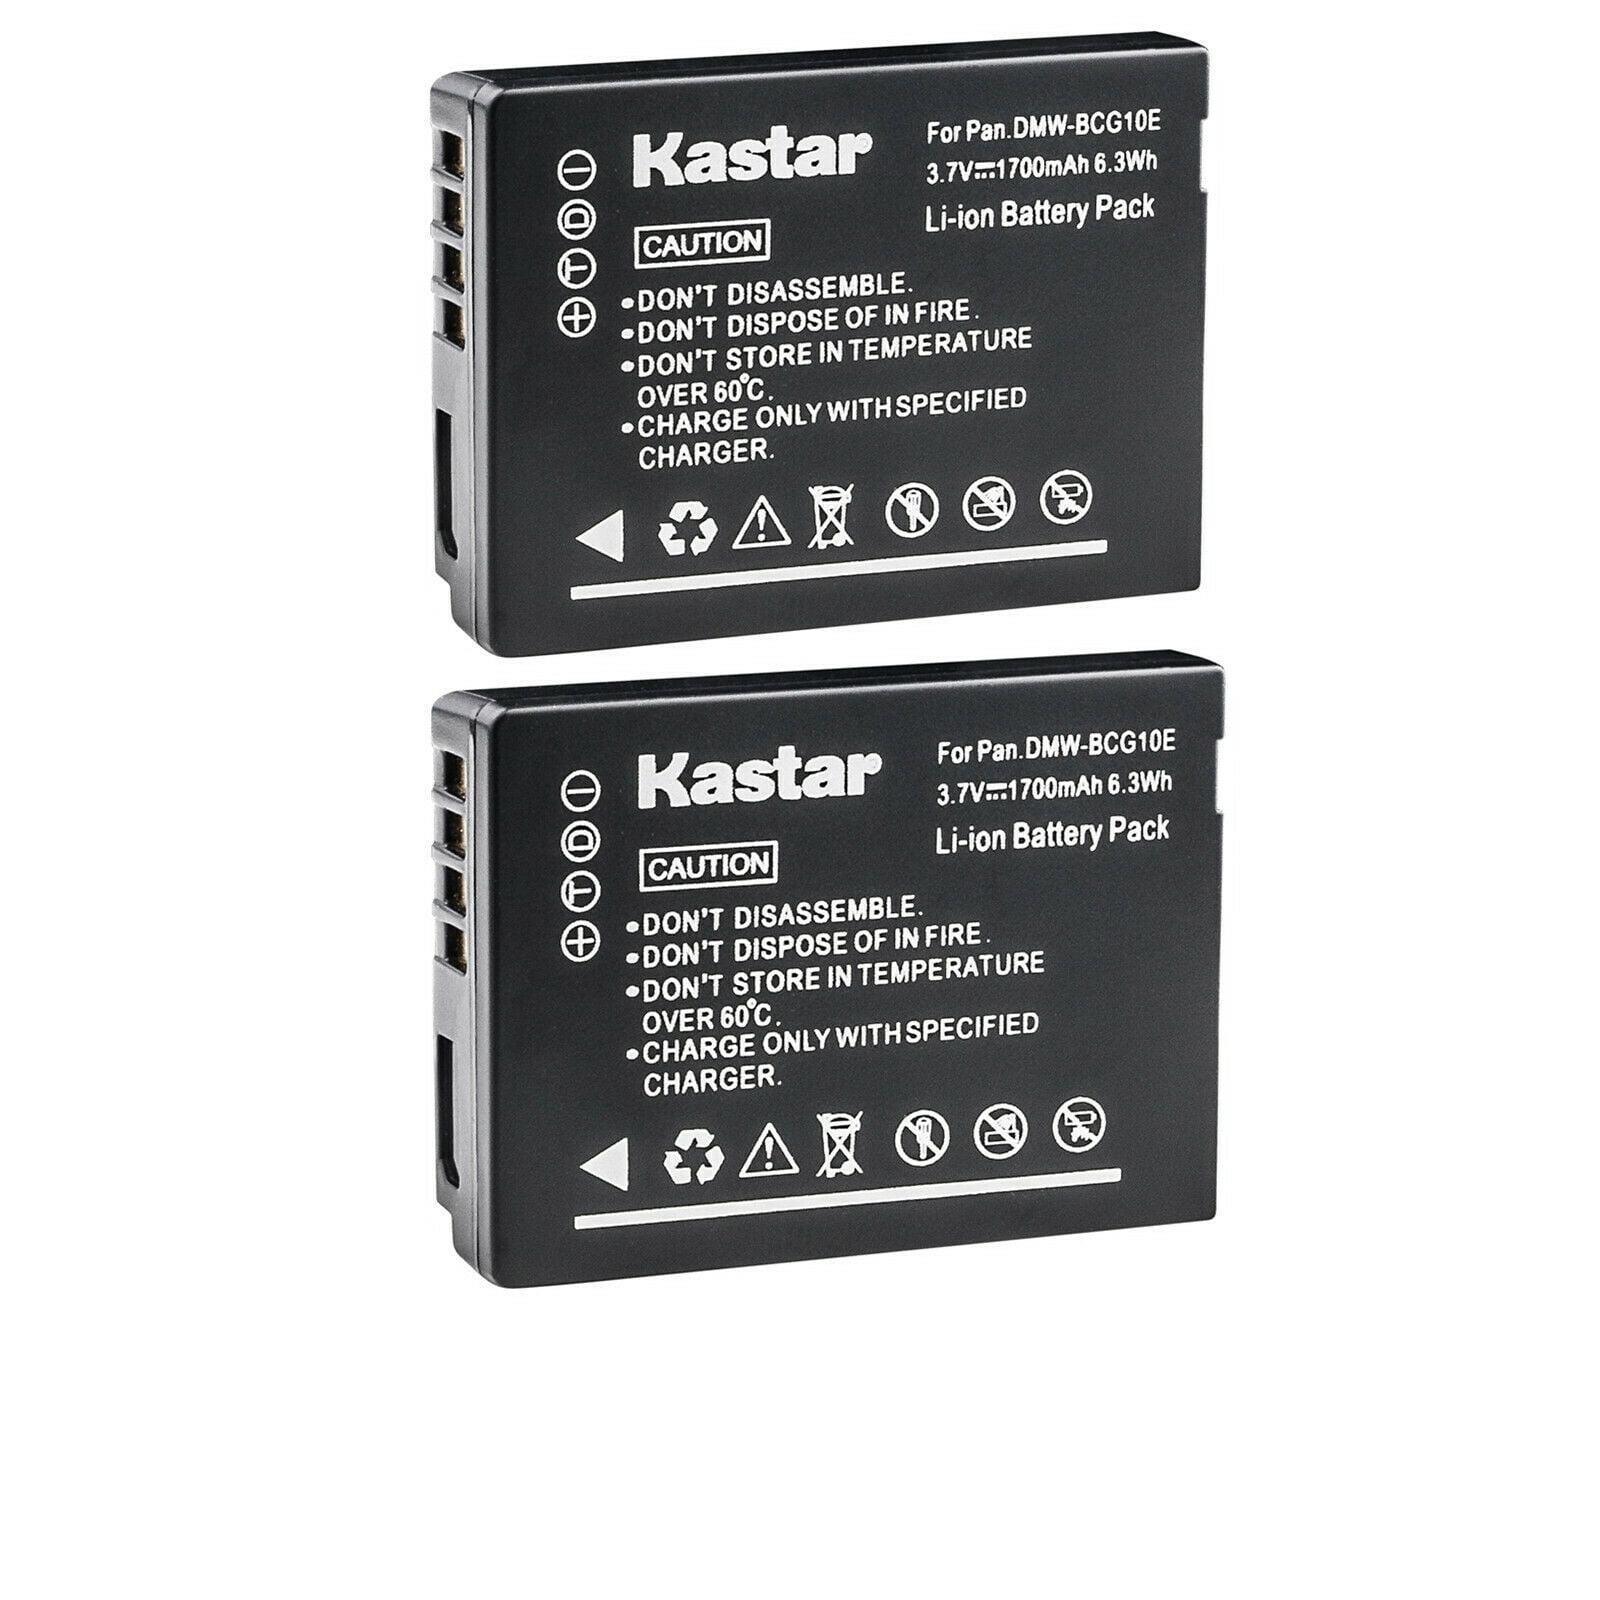 Kastar 1-Pack DMW-BCG10 Battery Replacement for Panasonic Lumix DMC-ZX1, Lumix DMC-ZX3, Lumix DMC-3D1, Lumix DMC-TZ6, Lumix Lumix DMC-TZ8, Lumix DMC-TZ9, Lumix DMC-TZ10, Lumix DMC-TZ18 Camera - Walmart.com